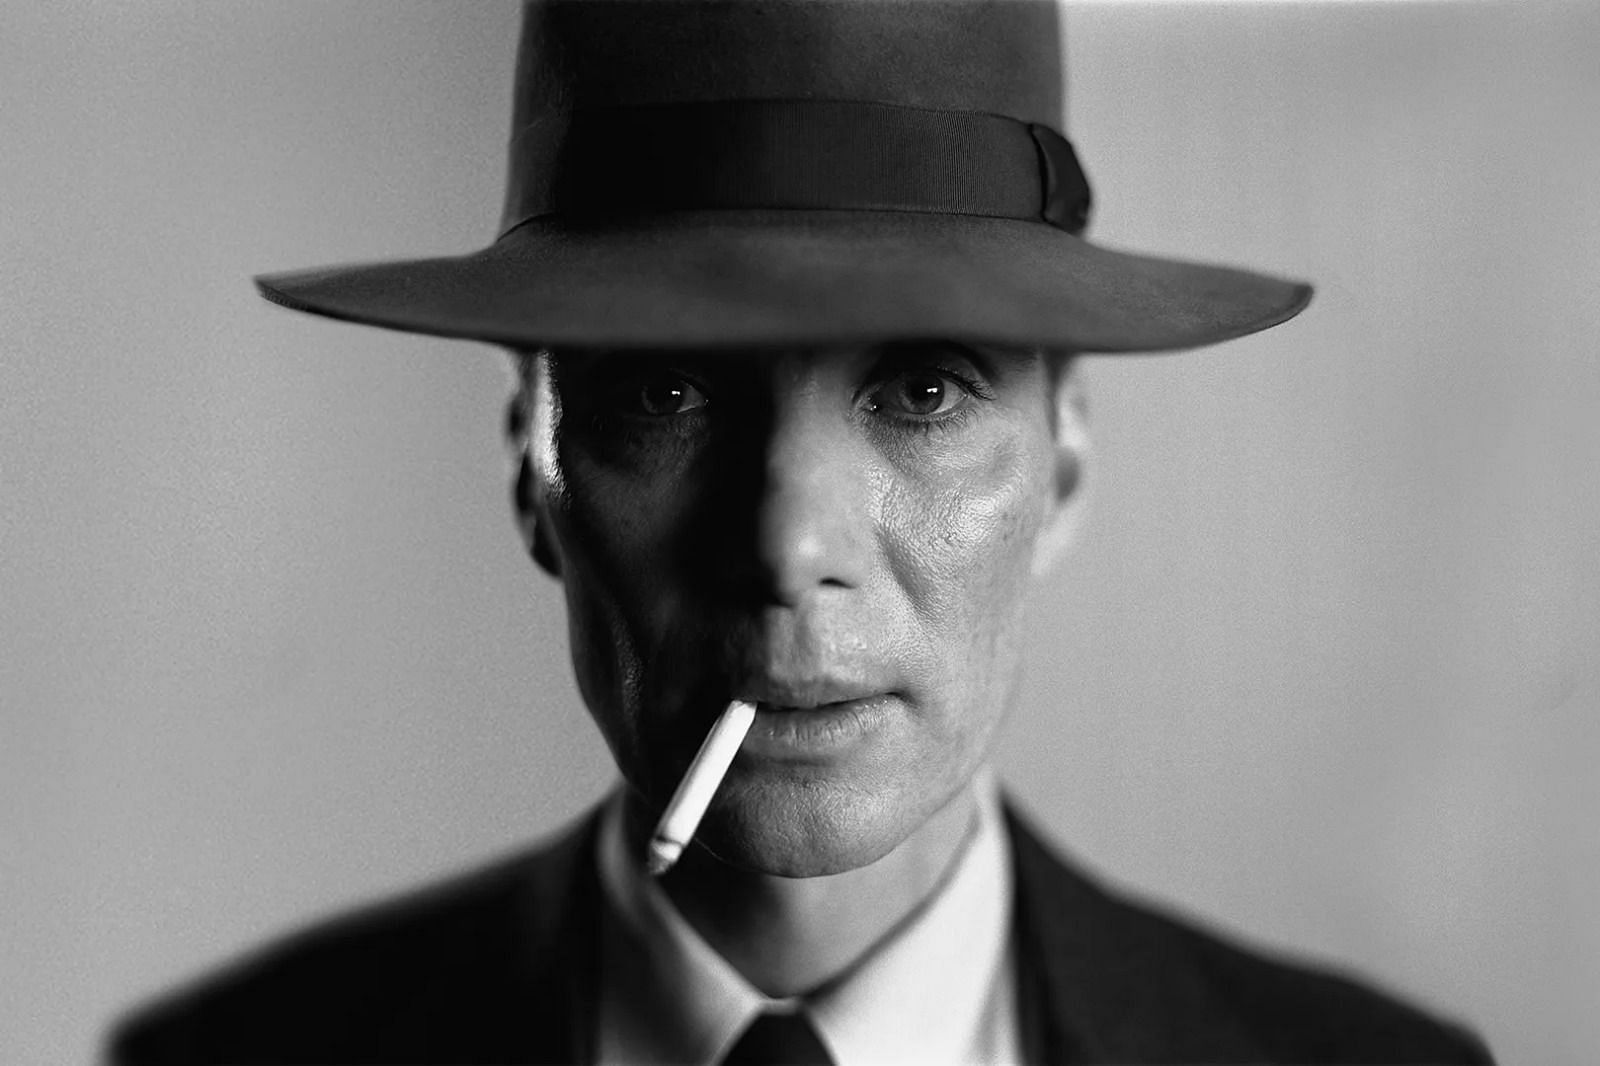 Cillian Murphy as Oppenheimer (Image via Paramount Pictures)